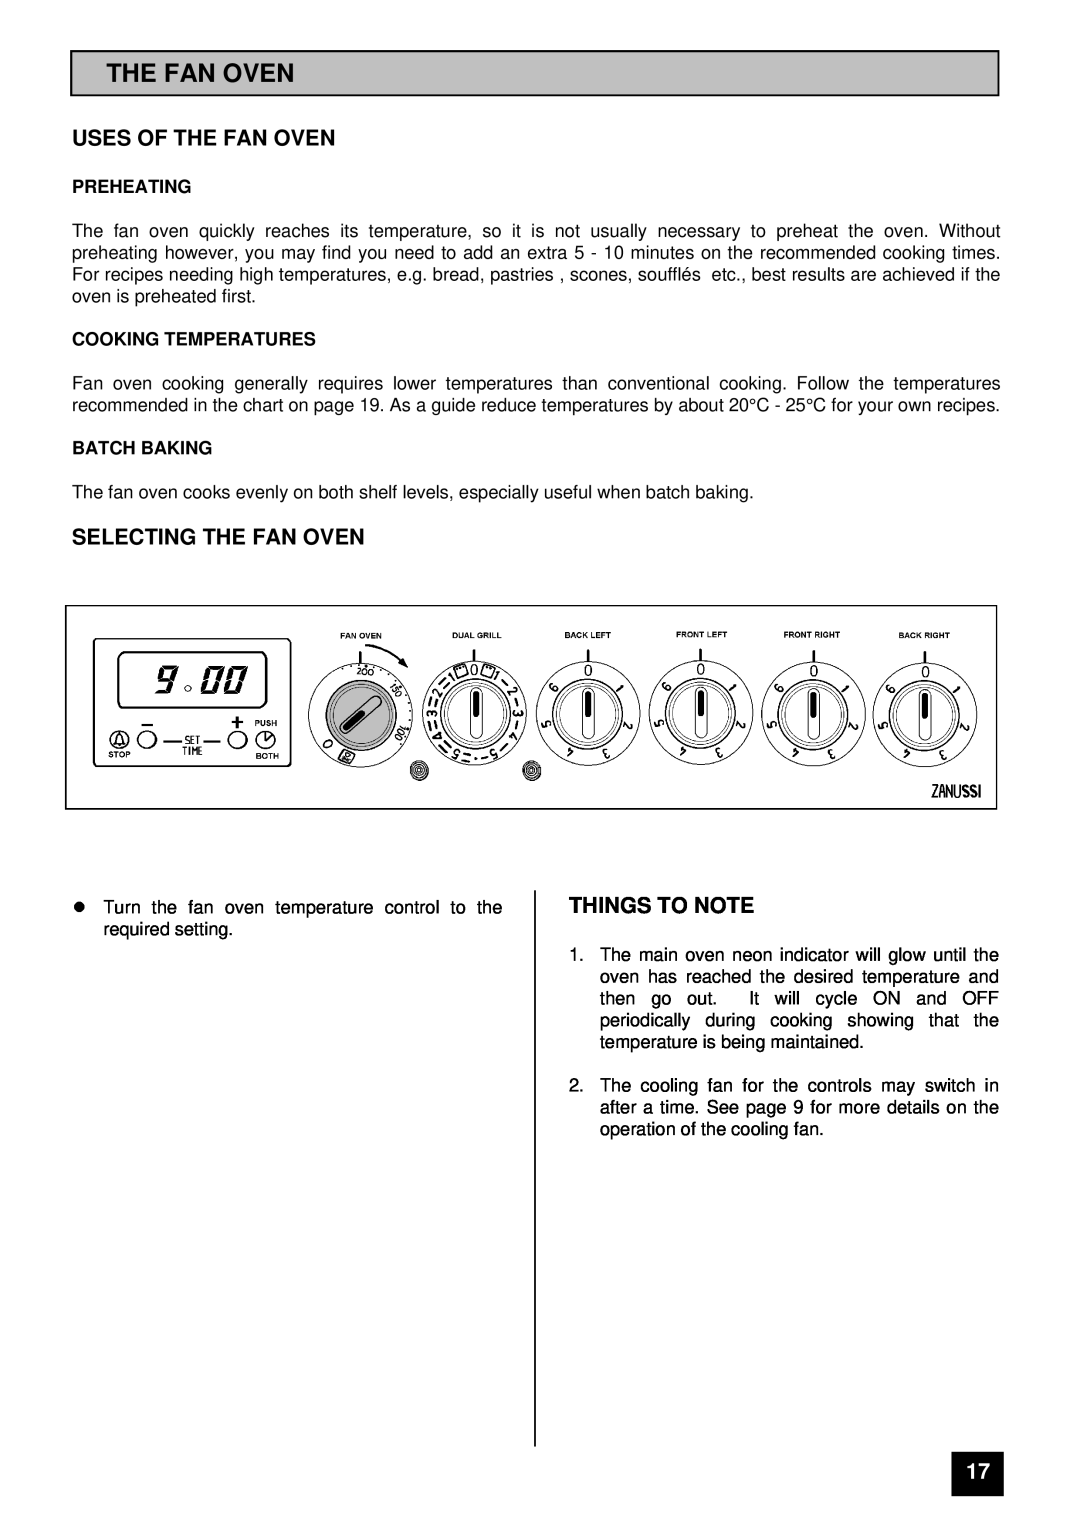 Zanussi ZCE 7350 manual Uses Of The Fan Oven, Selecting The Fan Oven, Things To Note, Preheating, Cooking Temperatures 